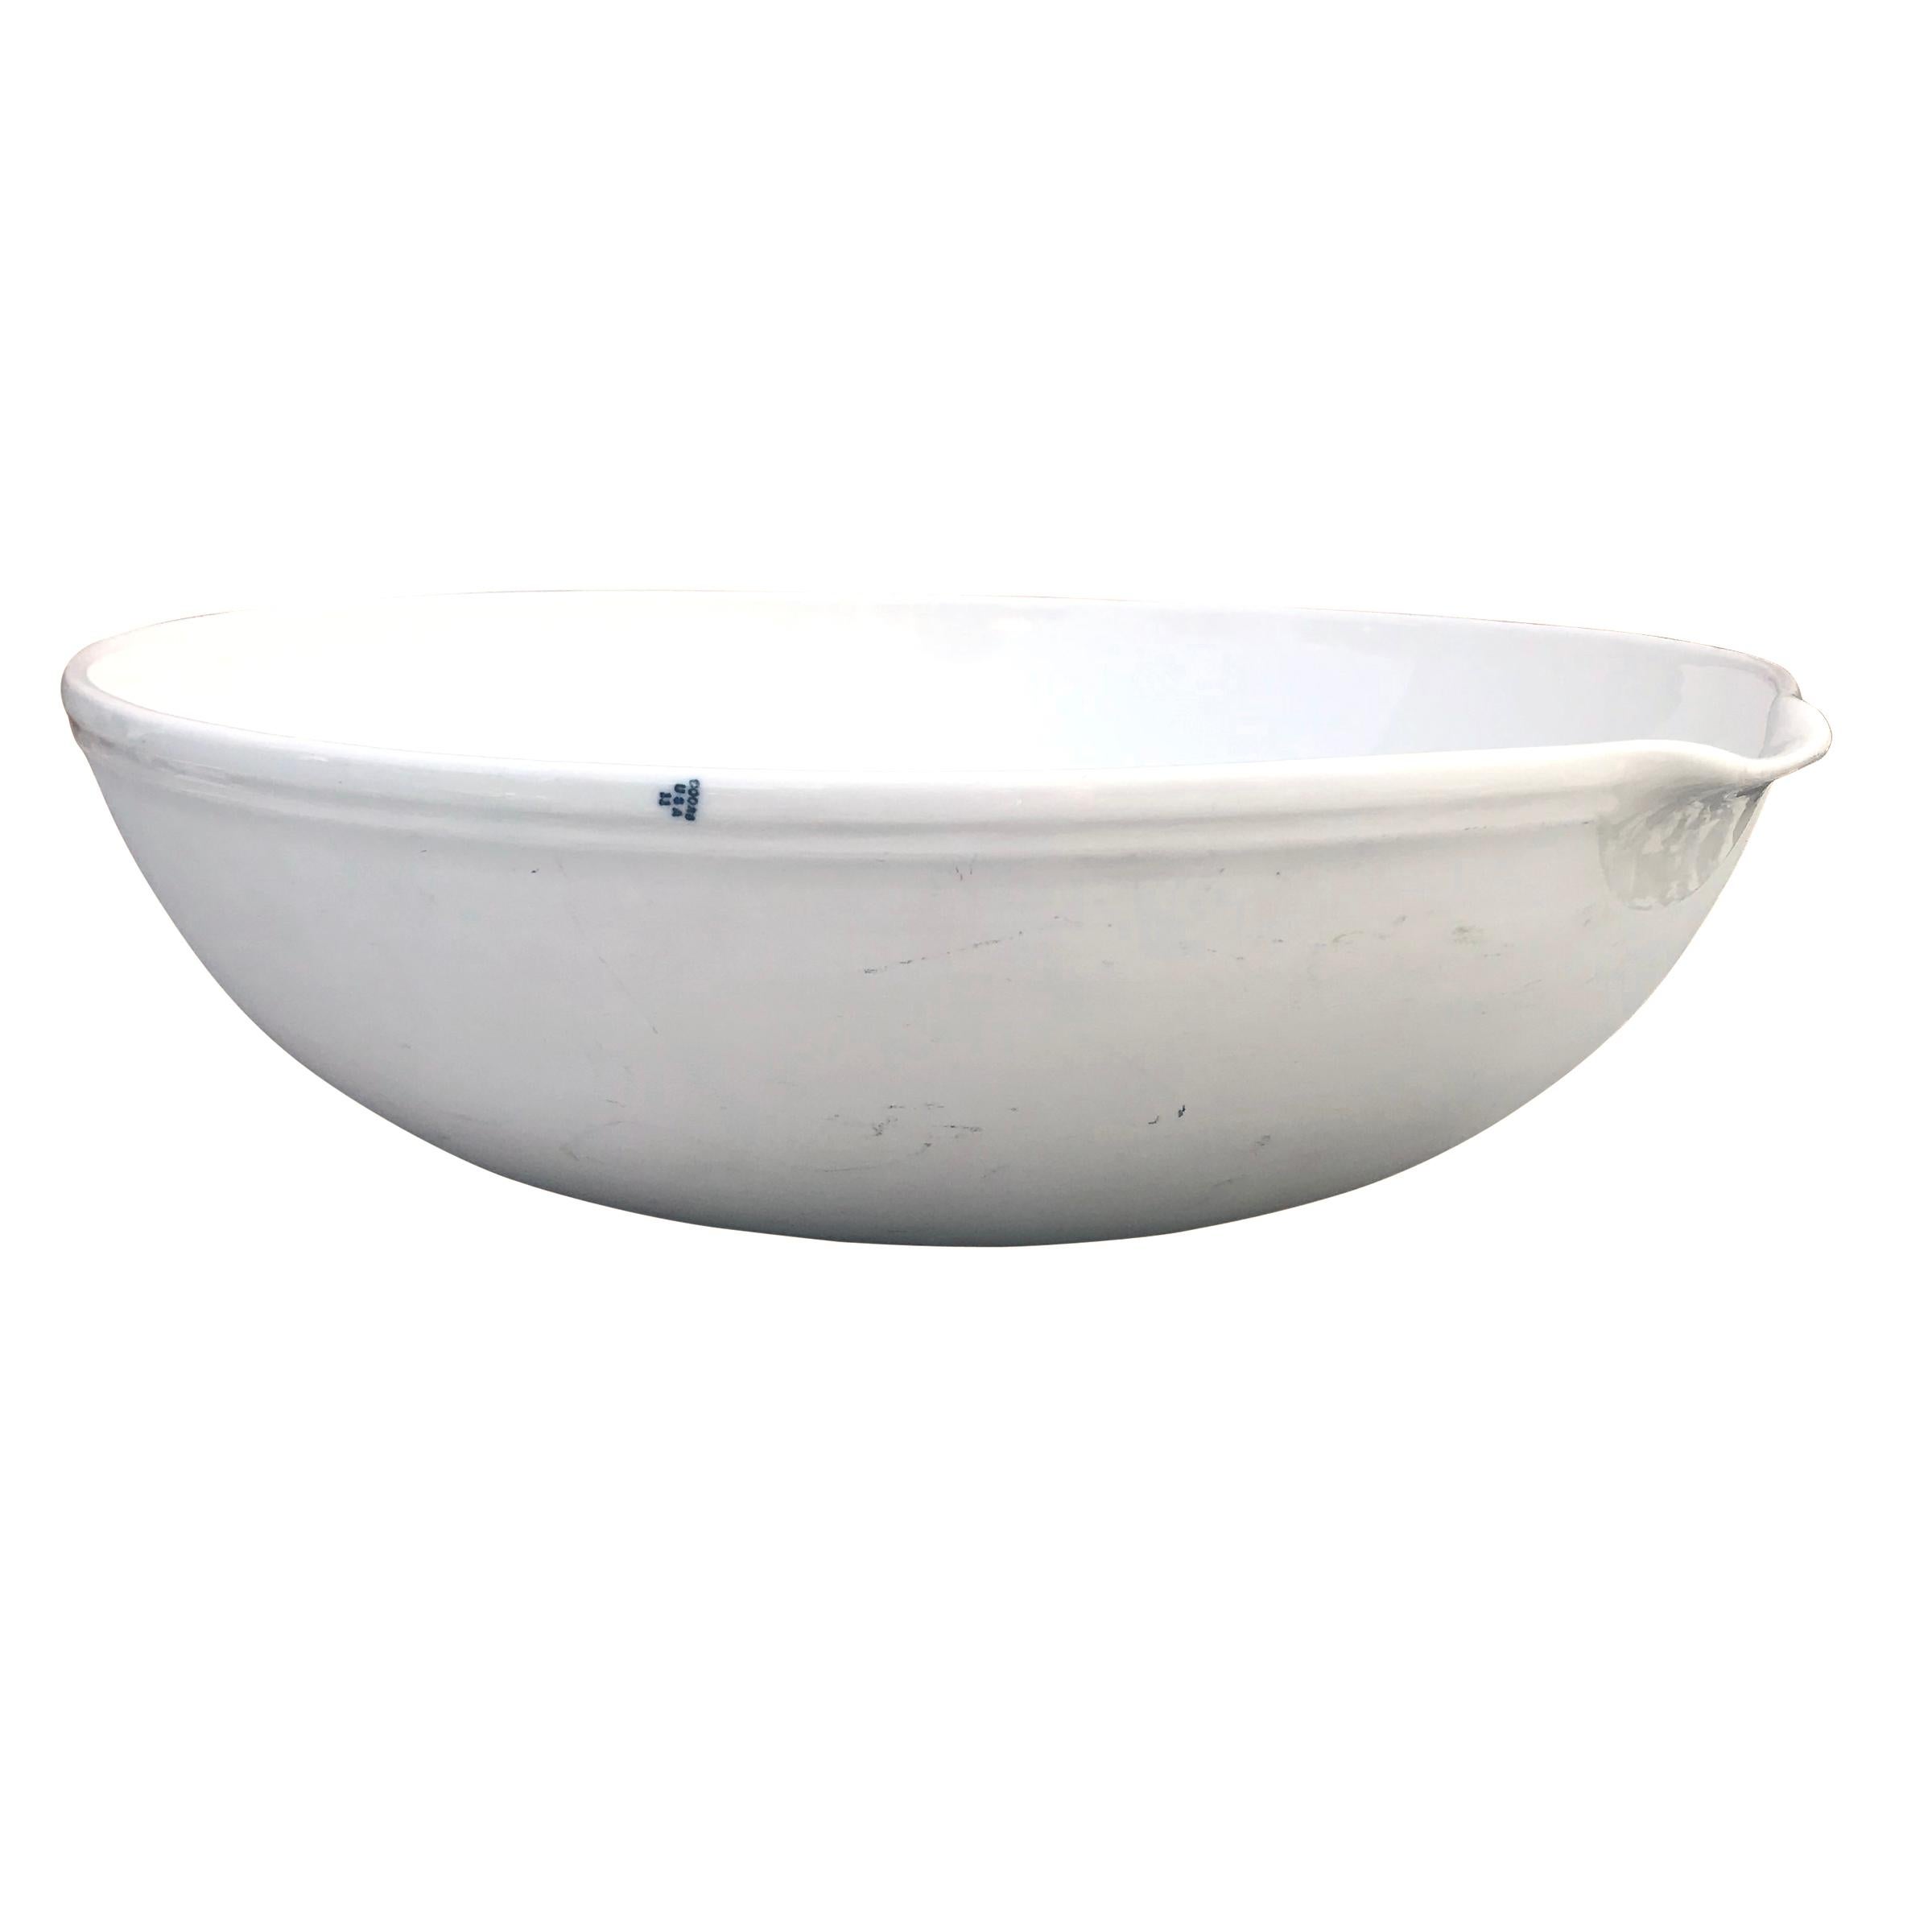 A wonderfully modern early 20th century Coors Porcelain Company evaporating dish with a glazed interior and spout, and an unglazed bisque exterior. An example of this bowl, along with several others, is in the collection of the Museum of Modern Art